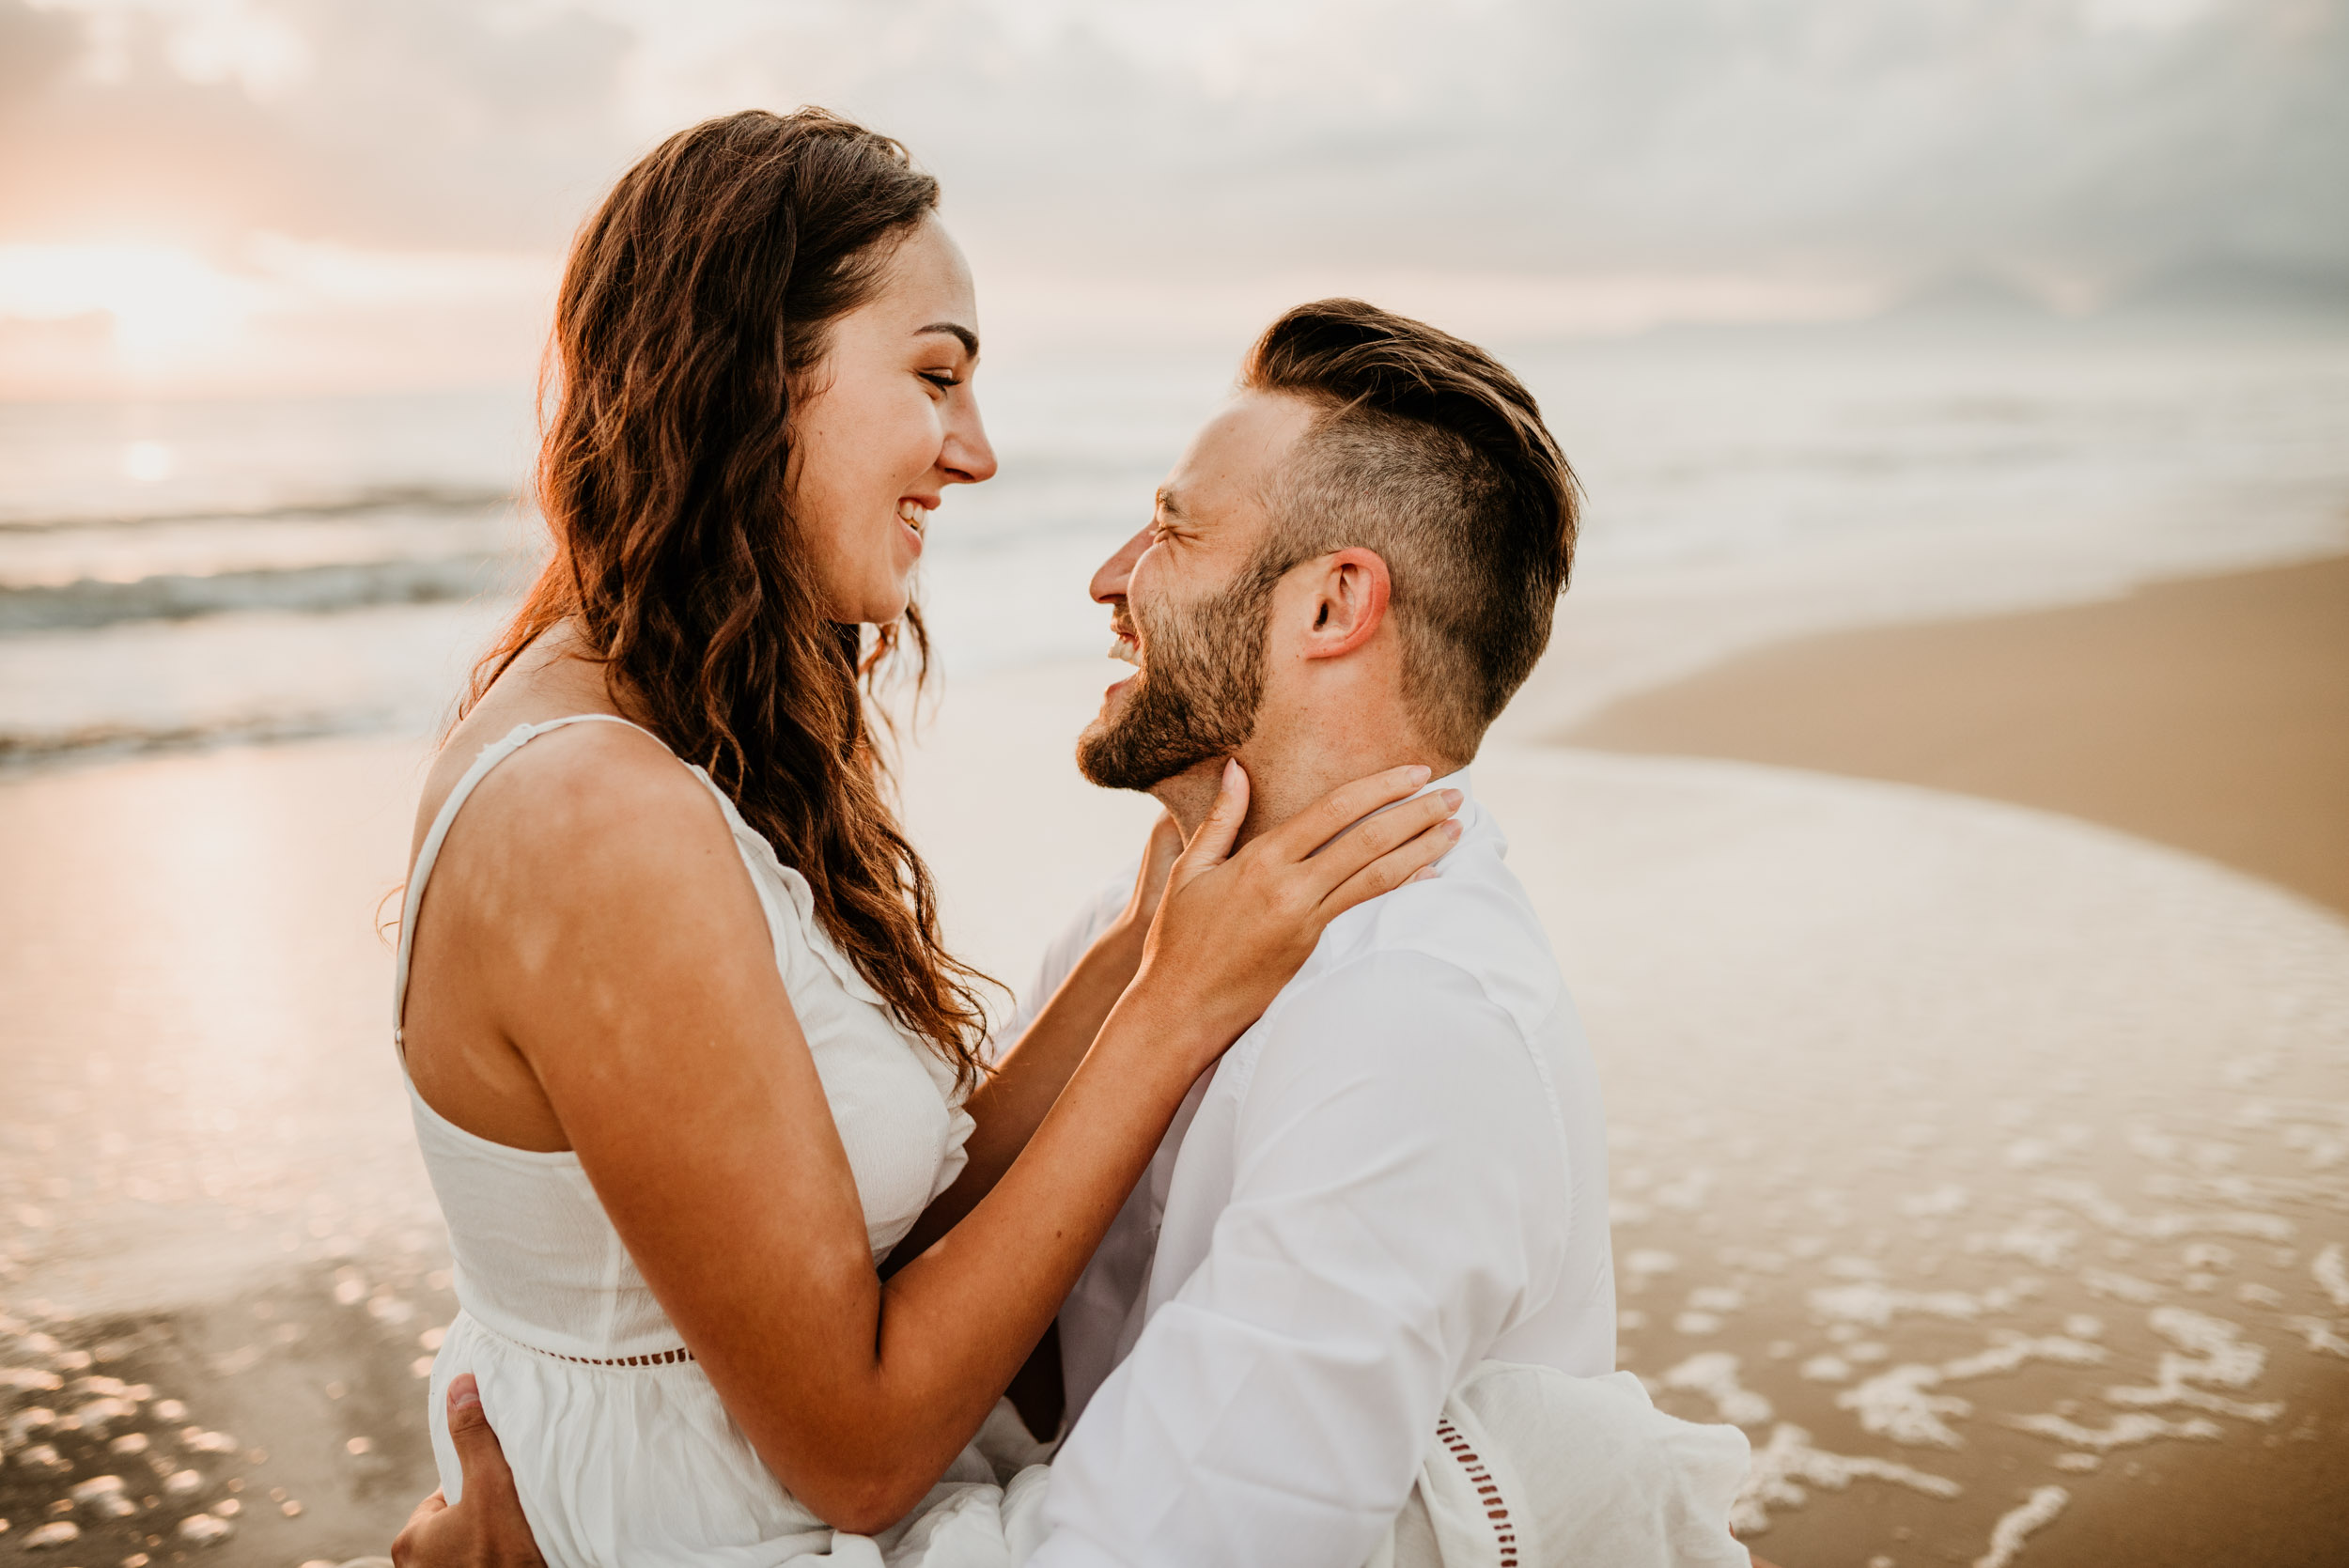 The Raw Photographer - Cairns Wedding Photographer - Engaged Engagement - Beach location - Candid Photography Queensland-15.jpg